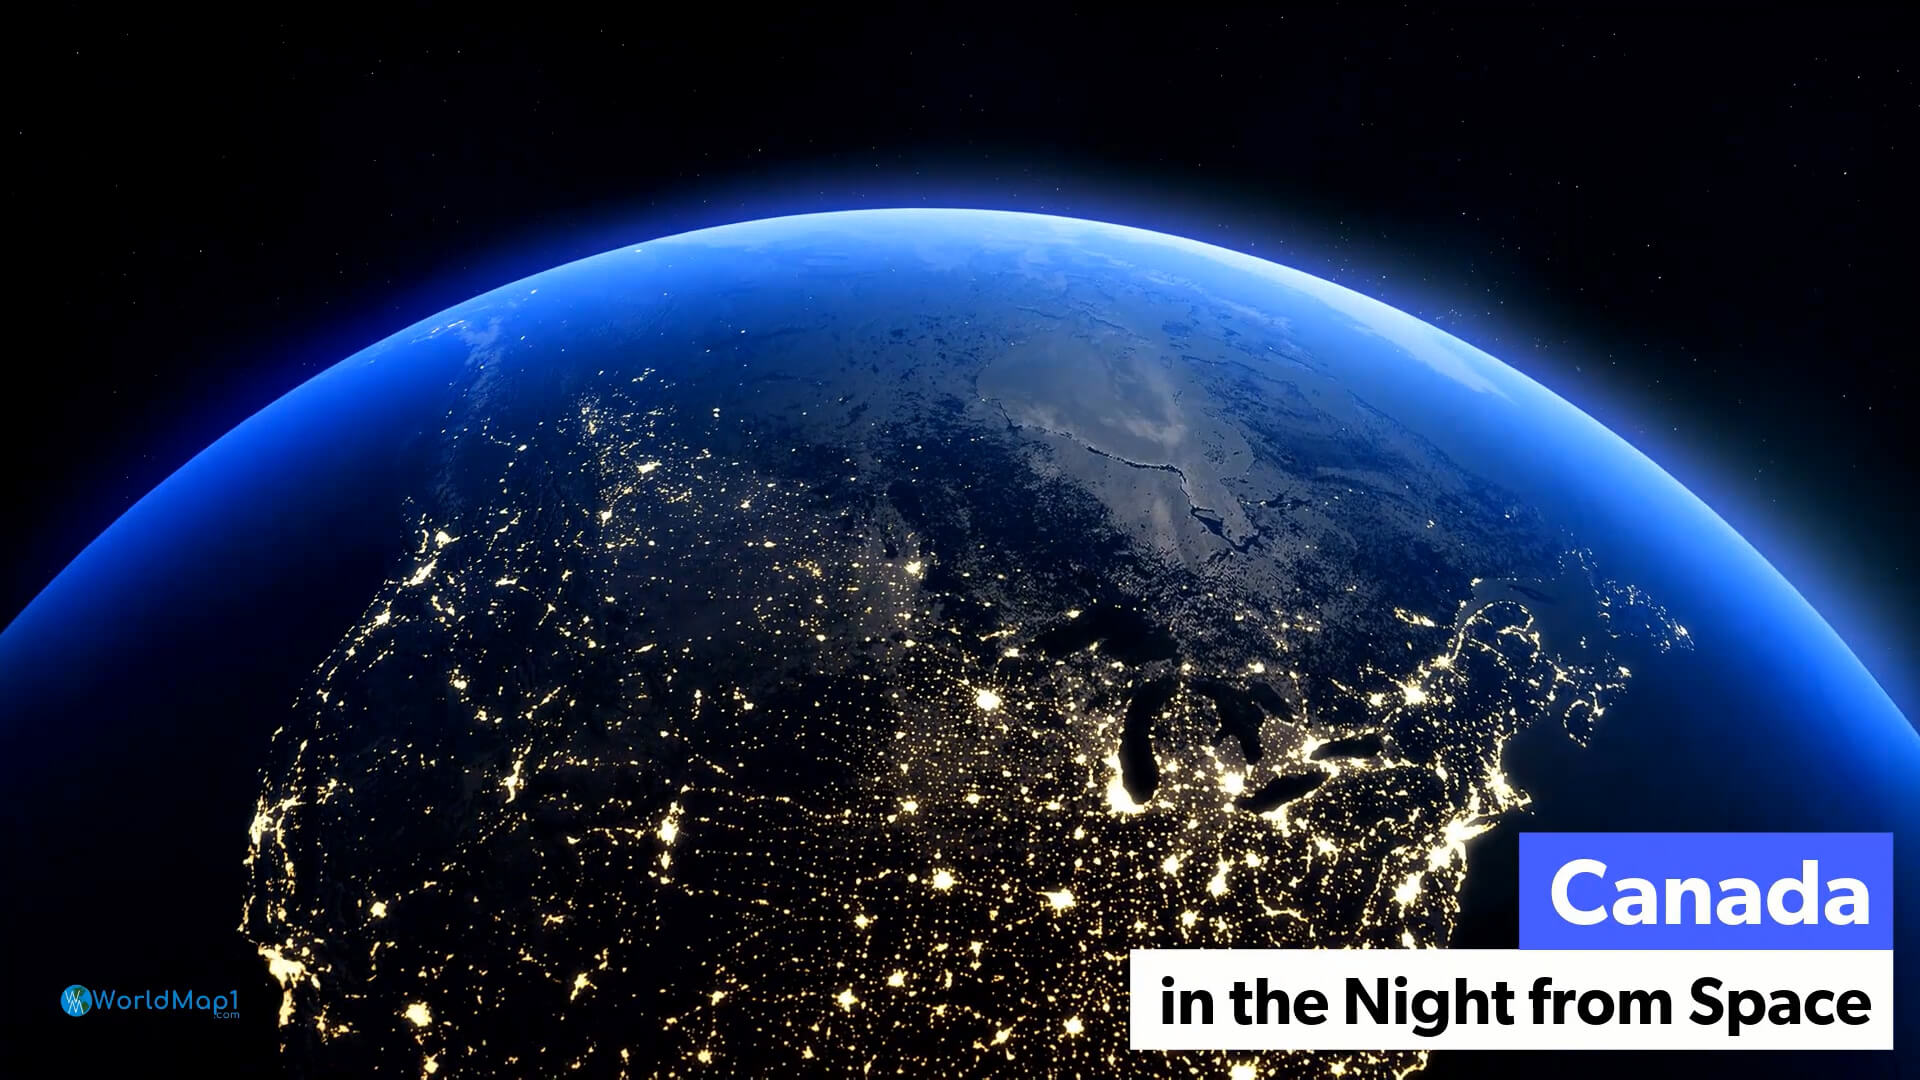 Canada in the Night from Space